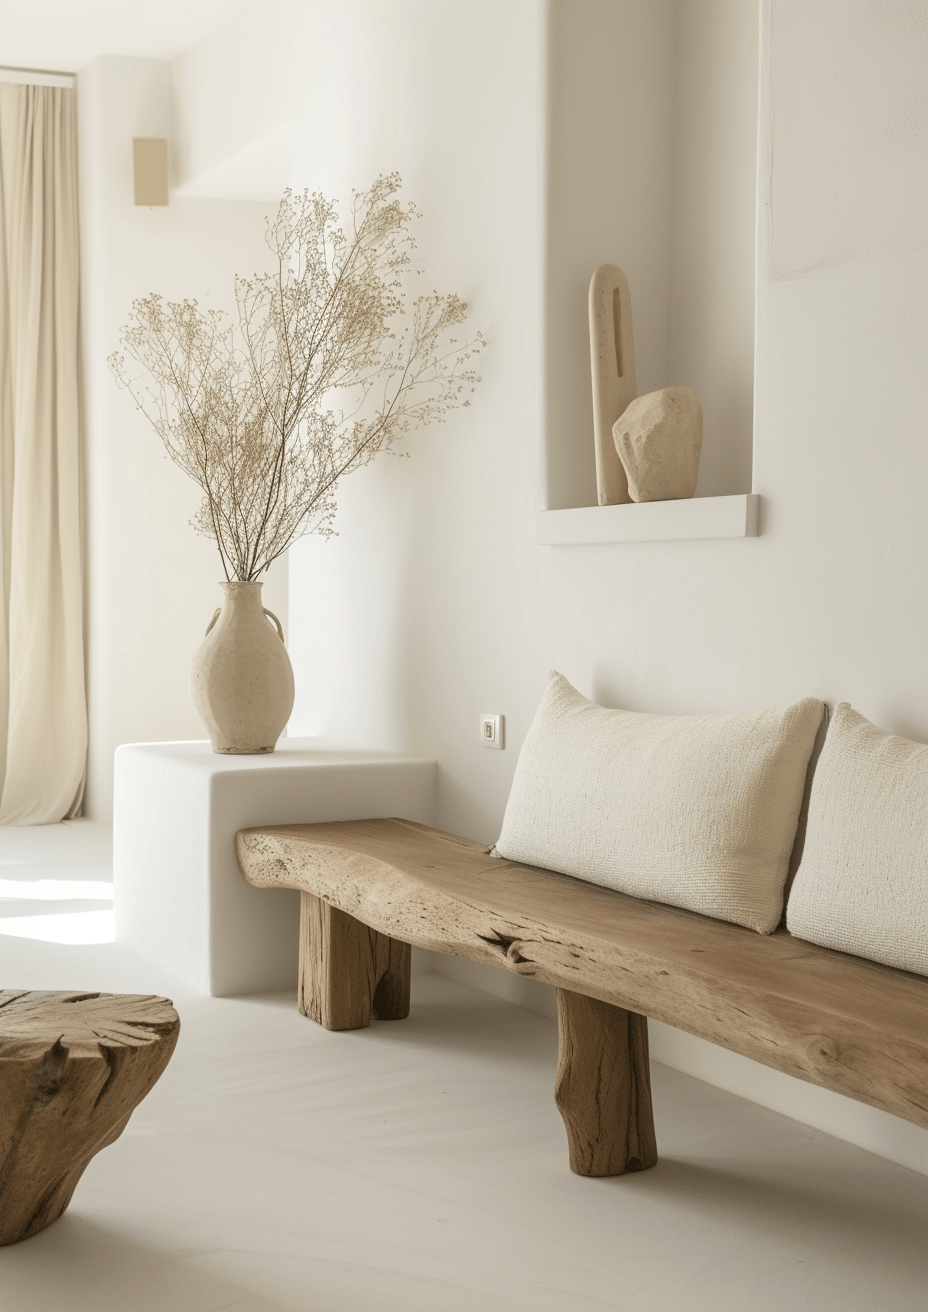 Cozy Japandi entryway bench setup with plush cushions and natural wood